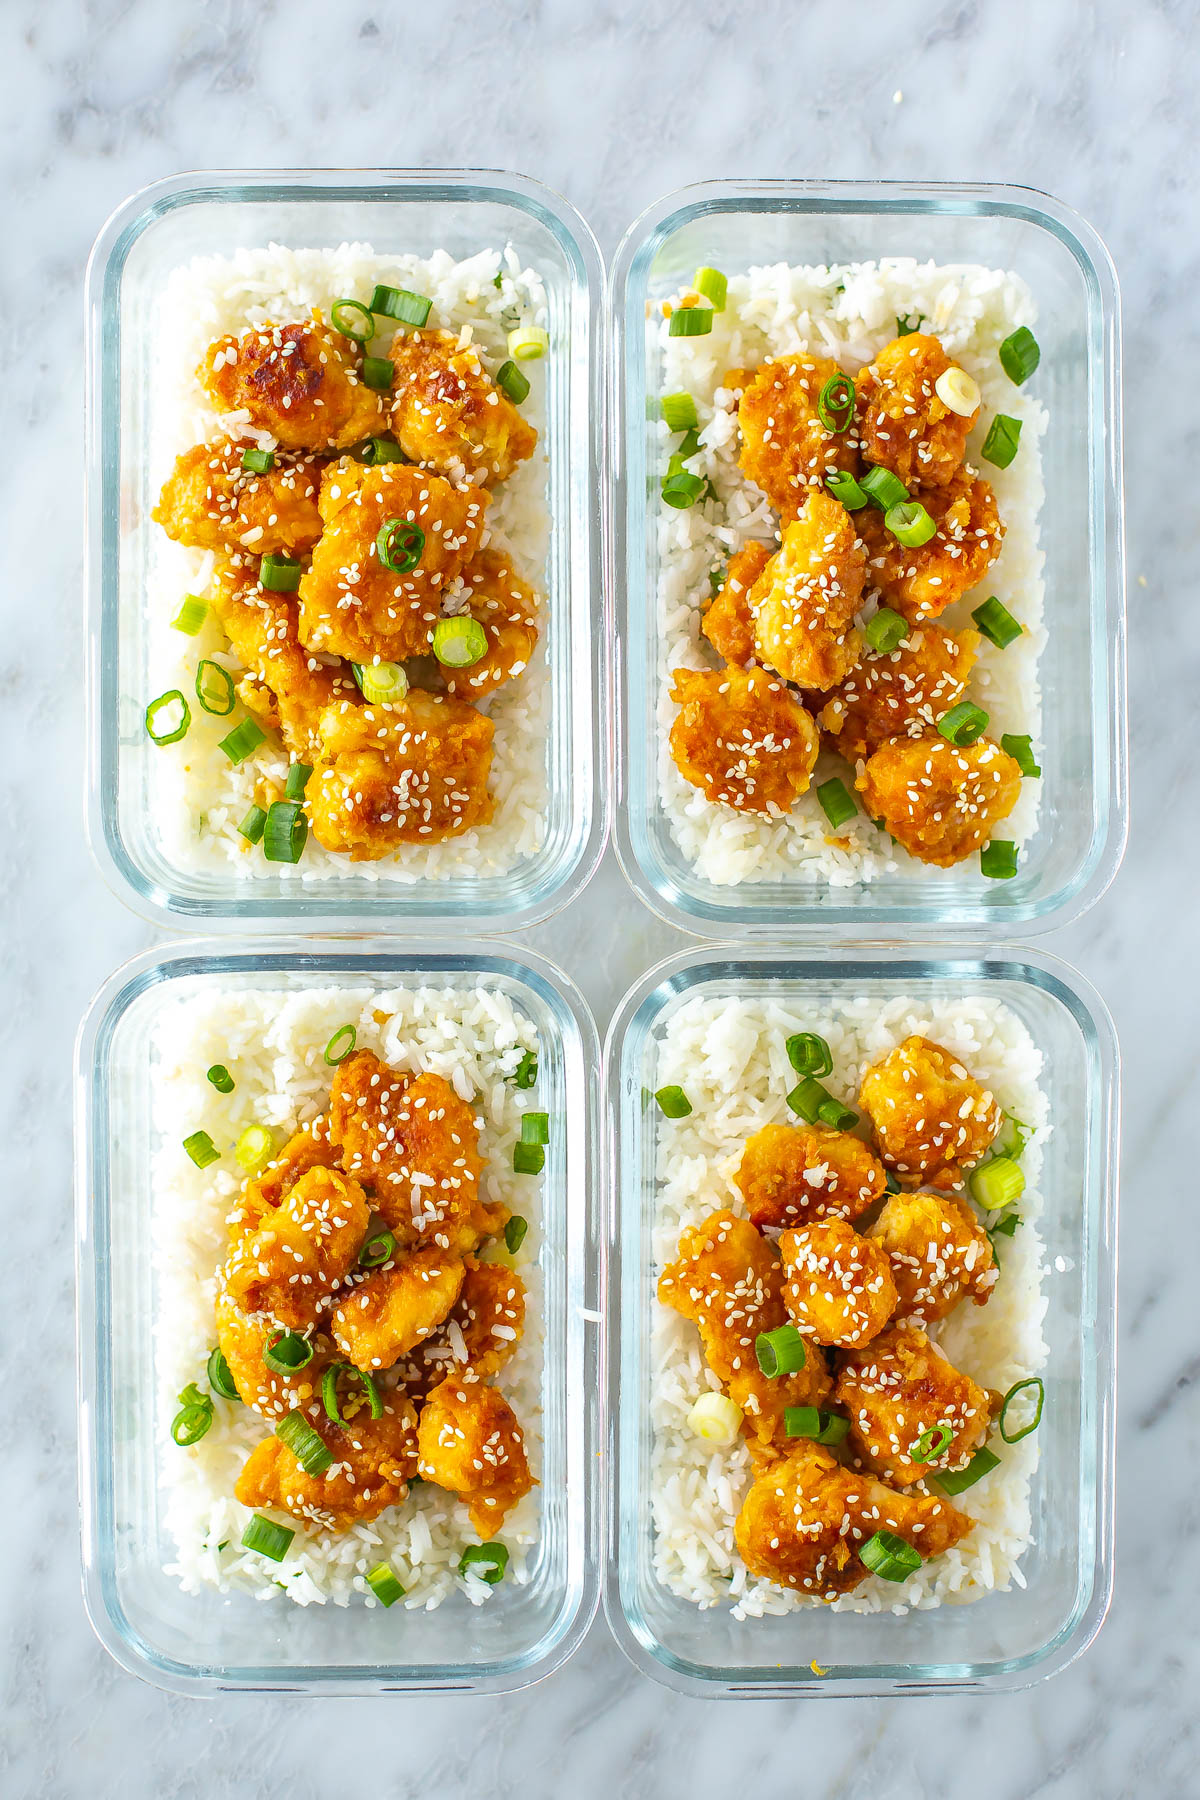 Four meal prep containers, each with a serving of Panda Express orange chicken.